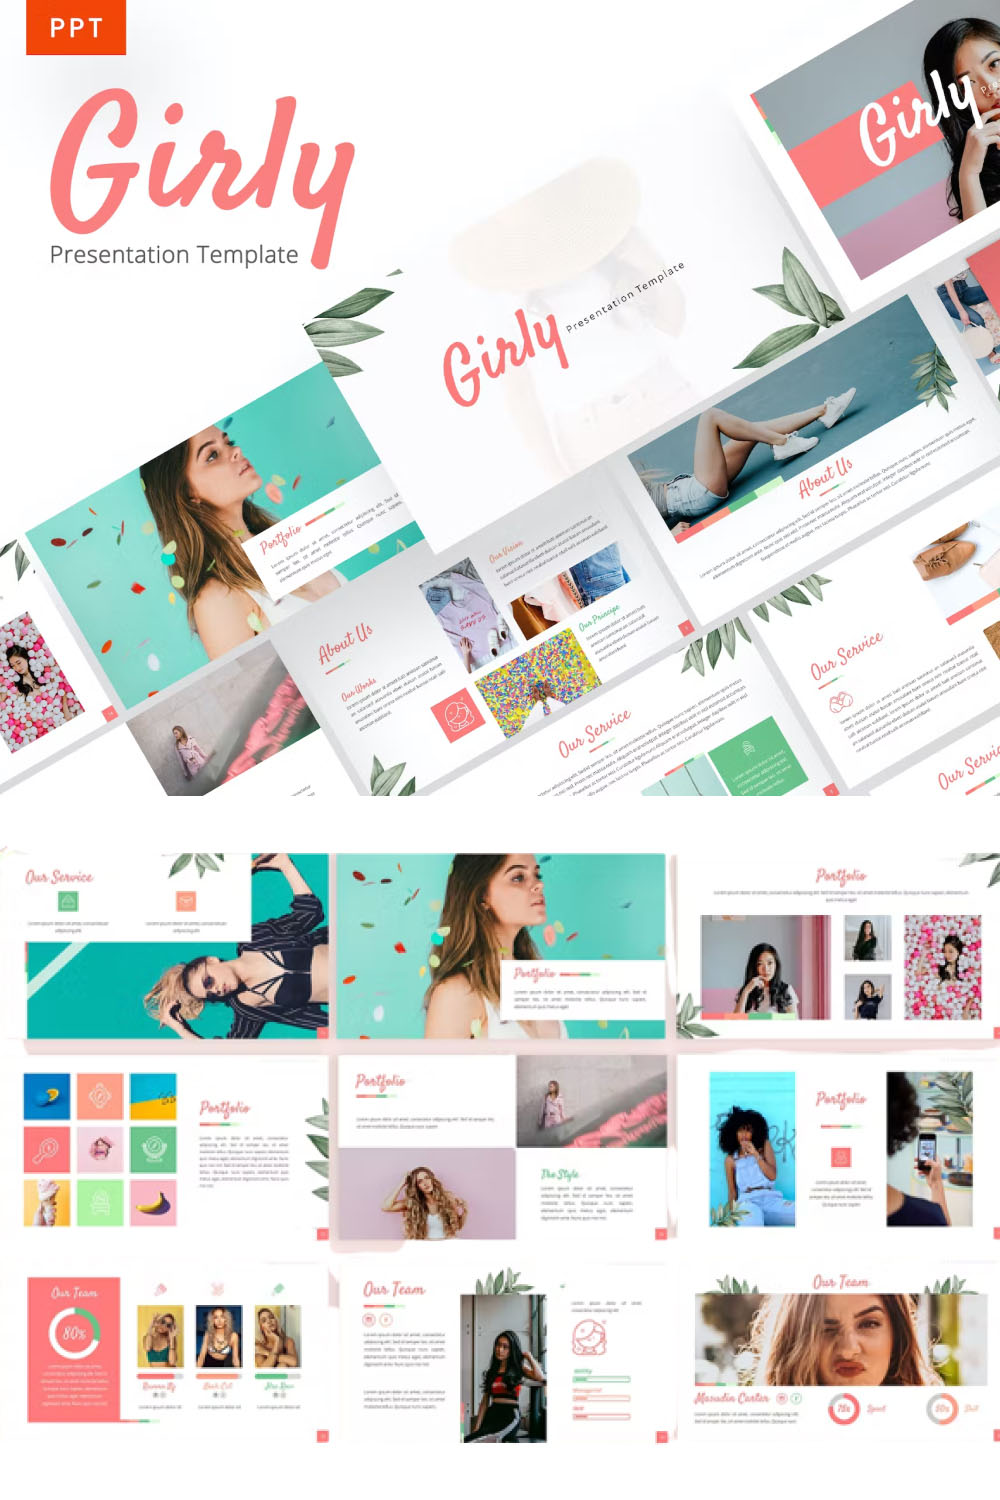 Girly beautiful powerpoint template of pinterest.